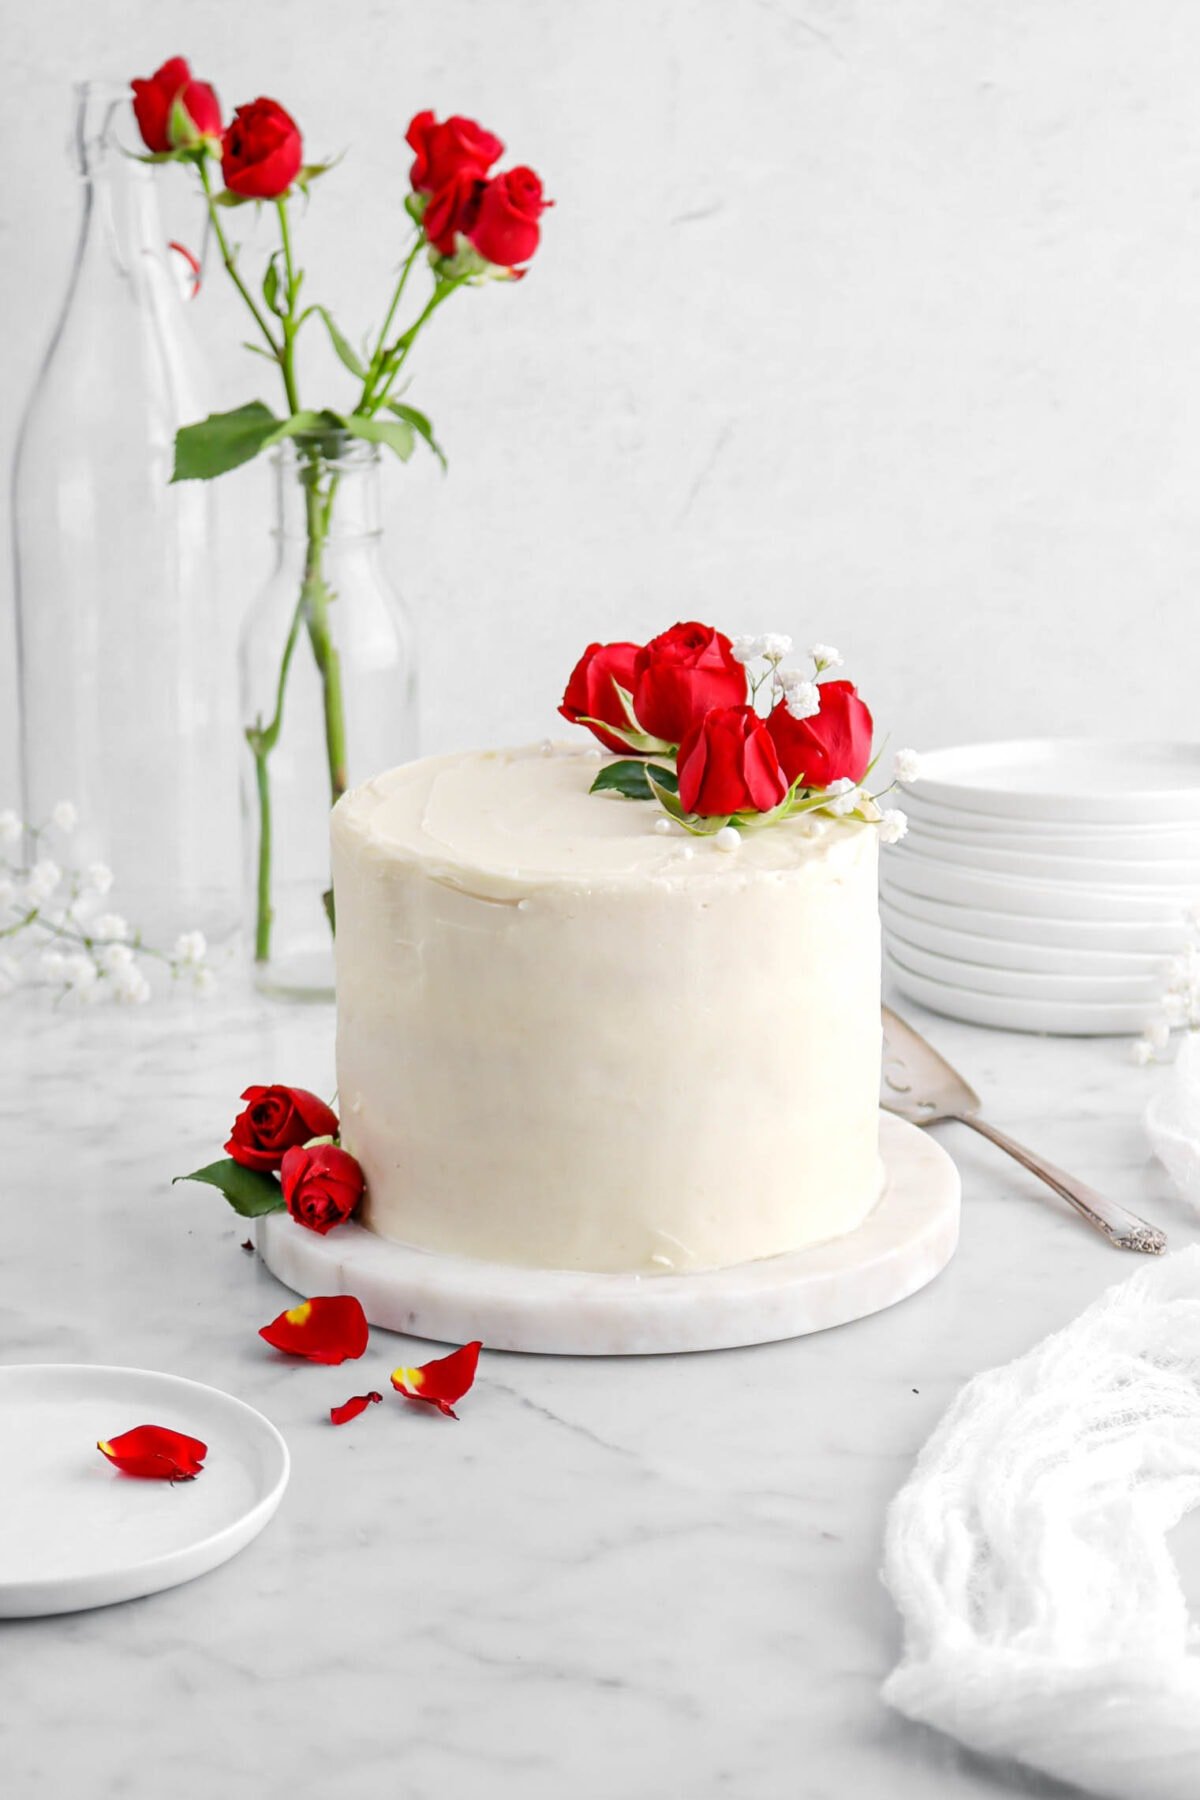 front shot of vanilla rose cake on marble board with roses and white flowers on top, a plate with a rose petal beside, stack of plates, and red roses in a glass behind.